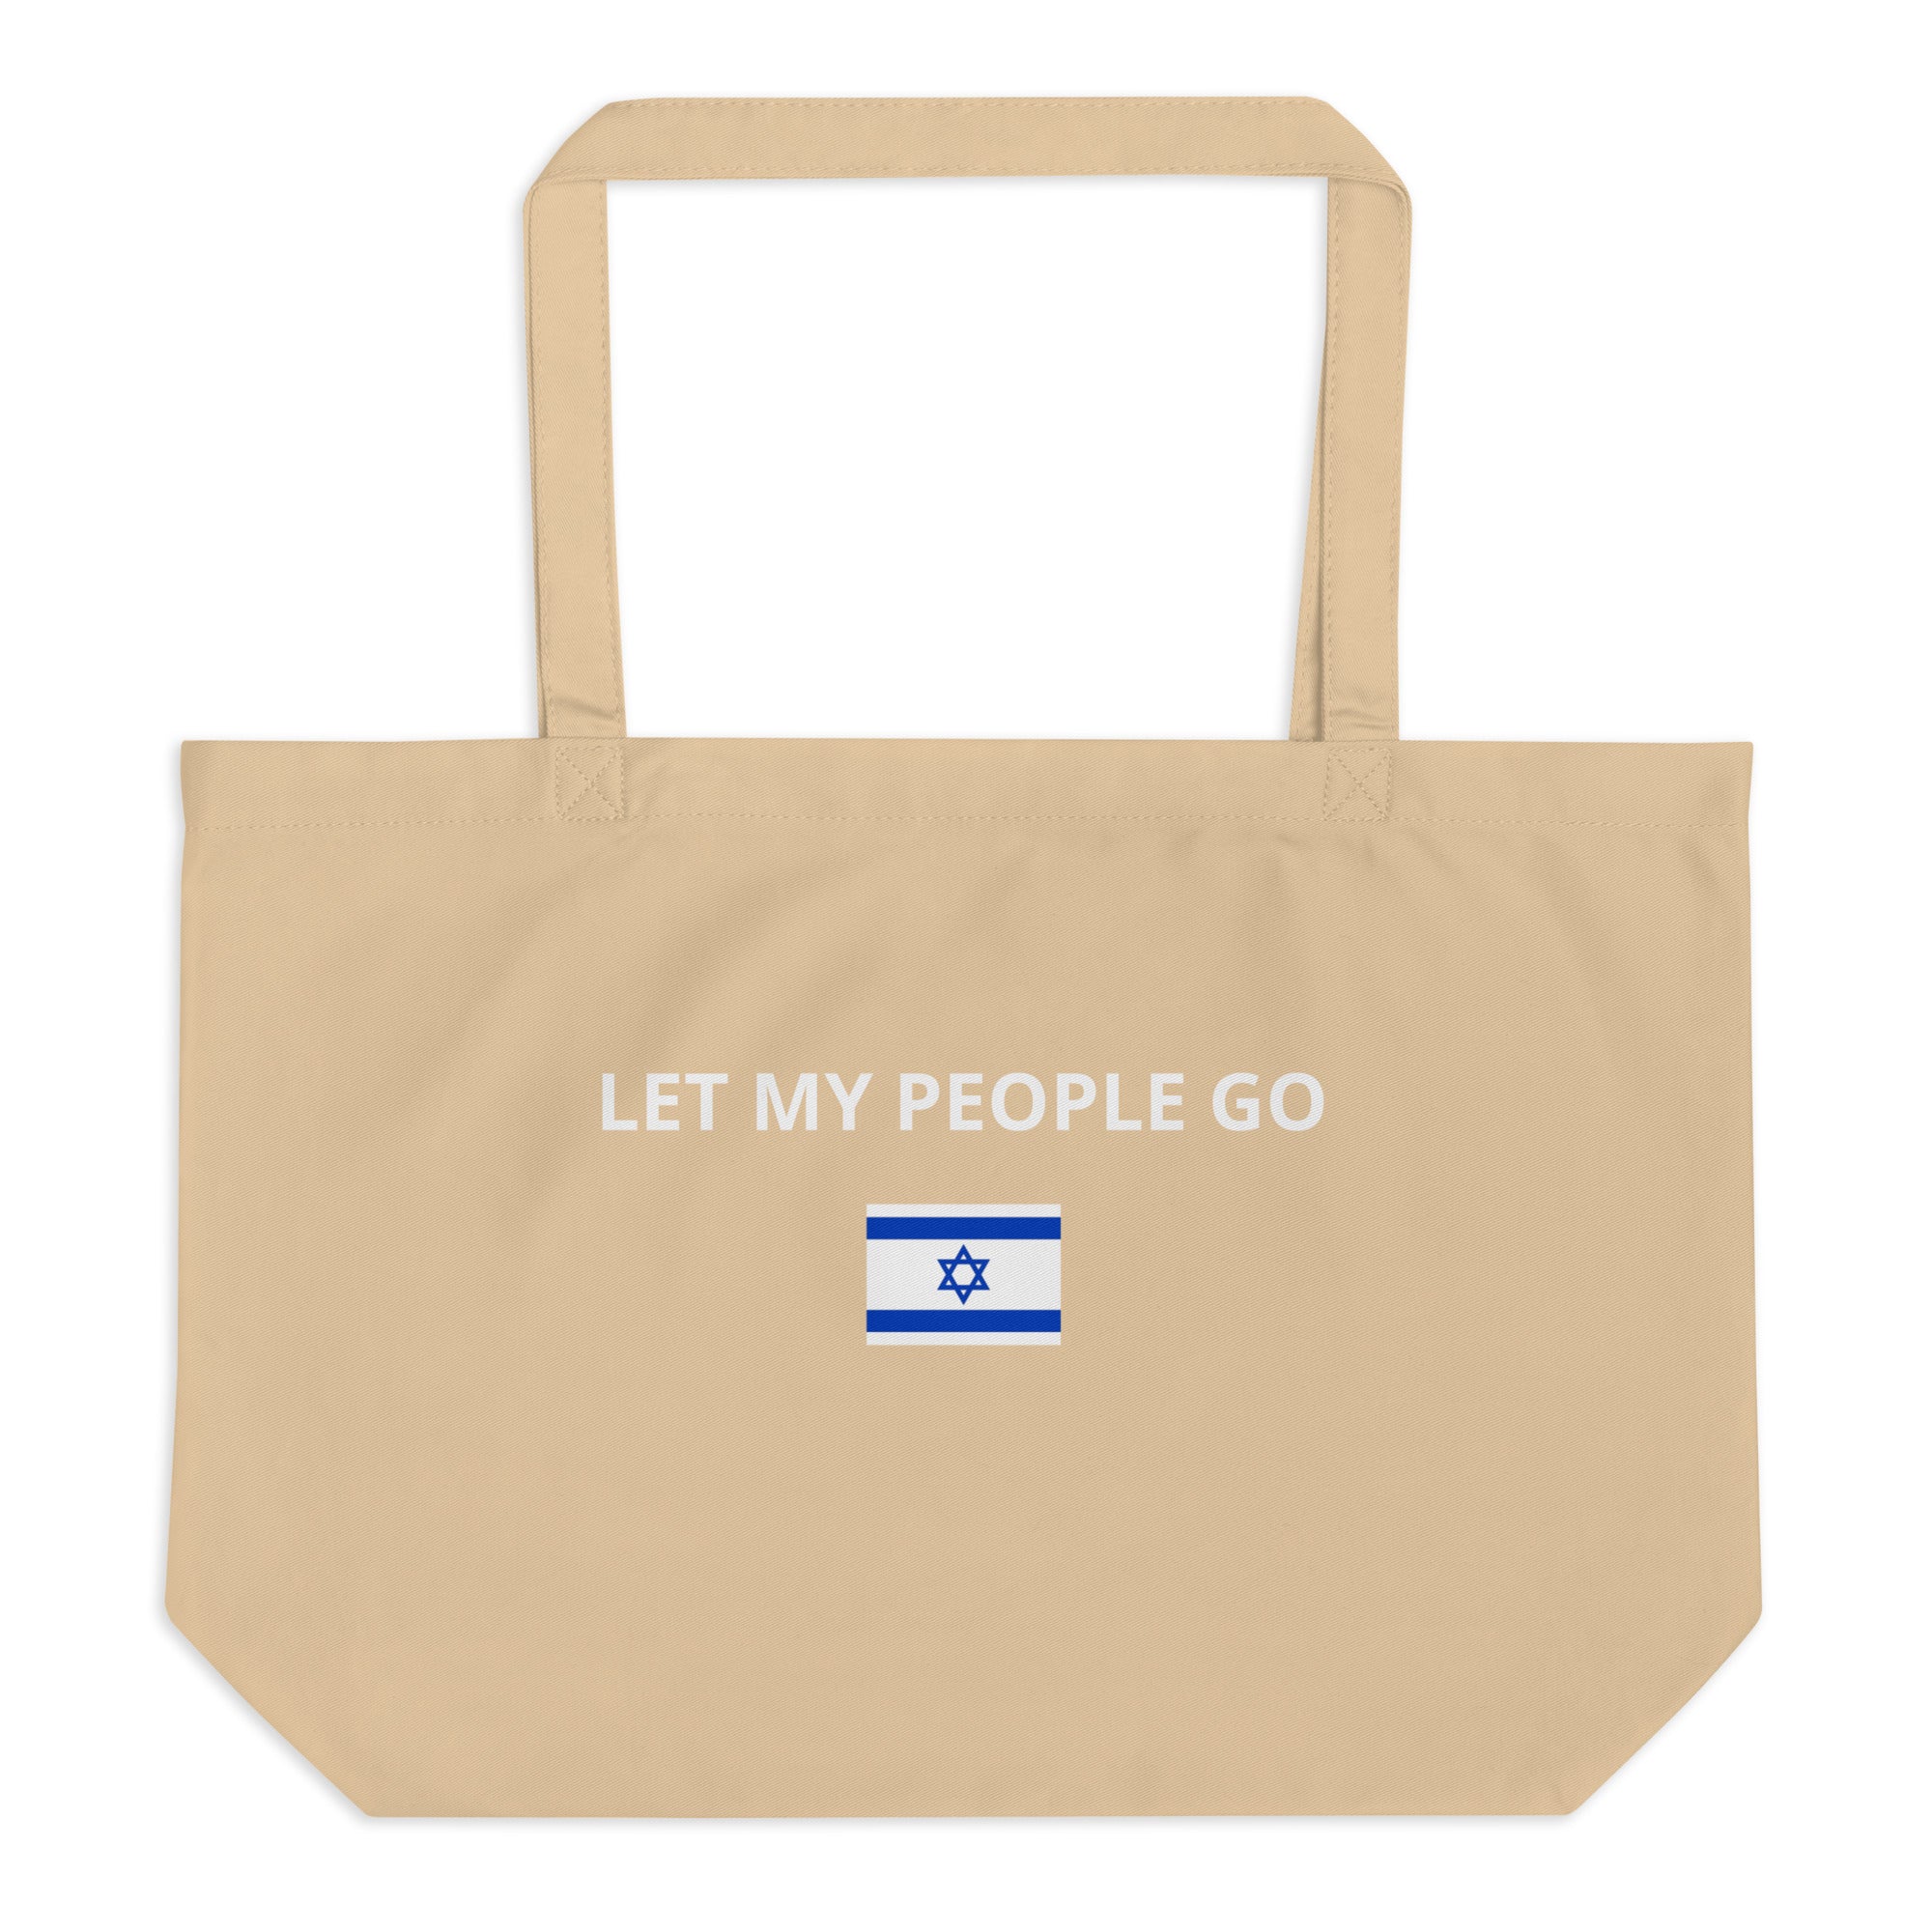 Let My People Go - Large organic tote bag